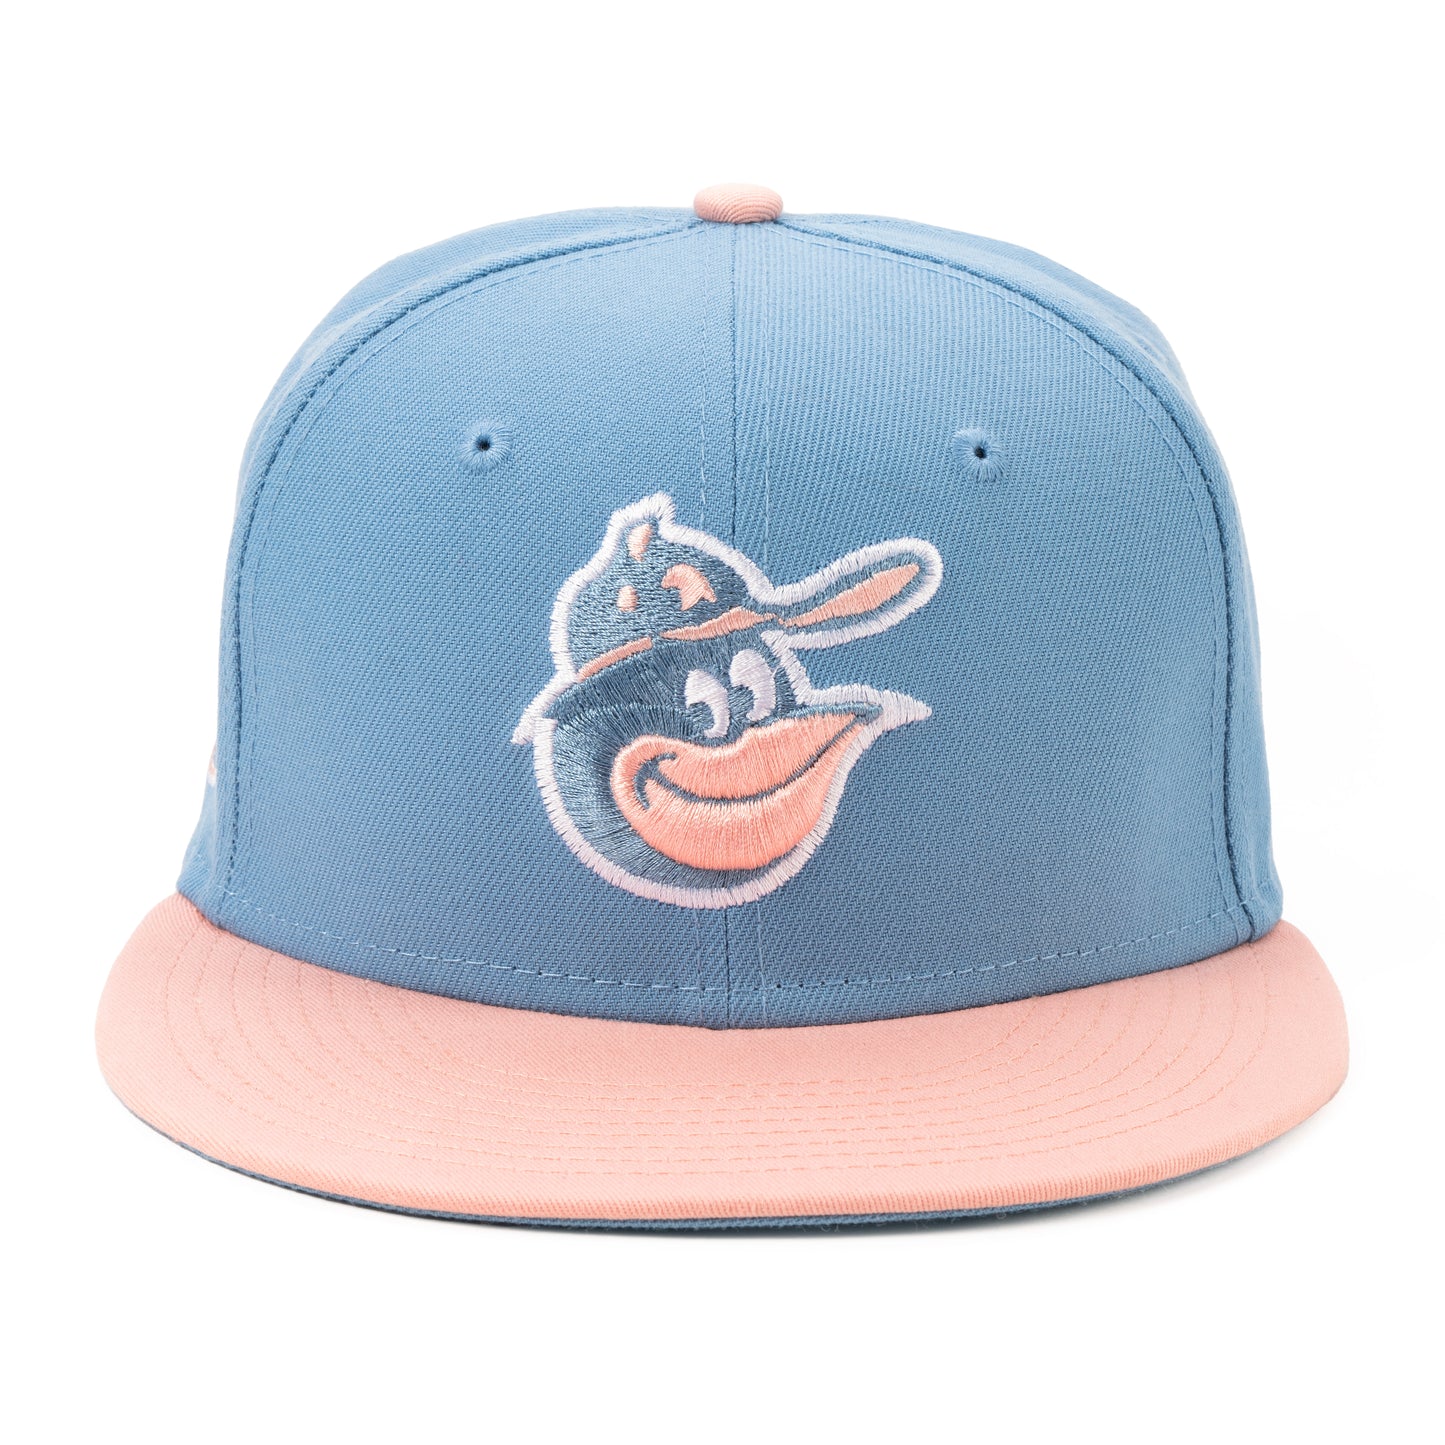 BALTIMORE ORIOLES "MARSHMALLOW PACK" NEW ERA 59FIFTY HAT